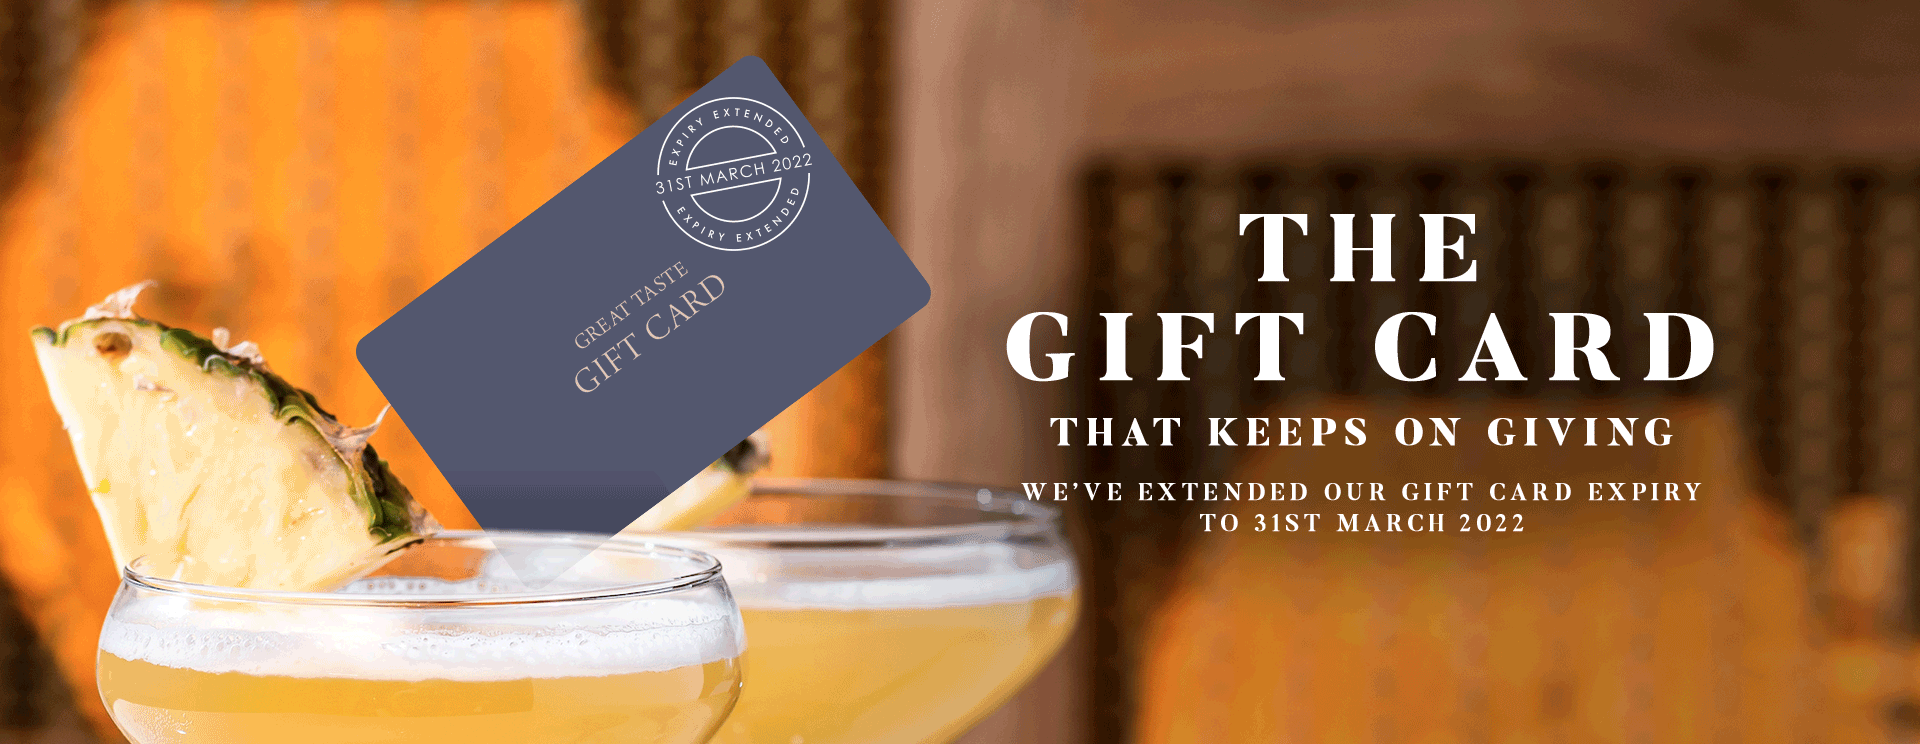 Give the gift of a gift card at The Belvedere Arms